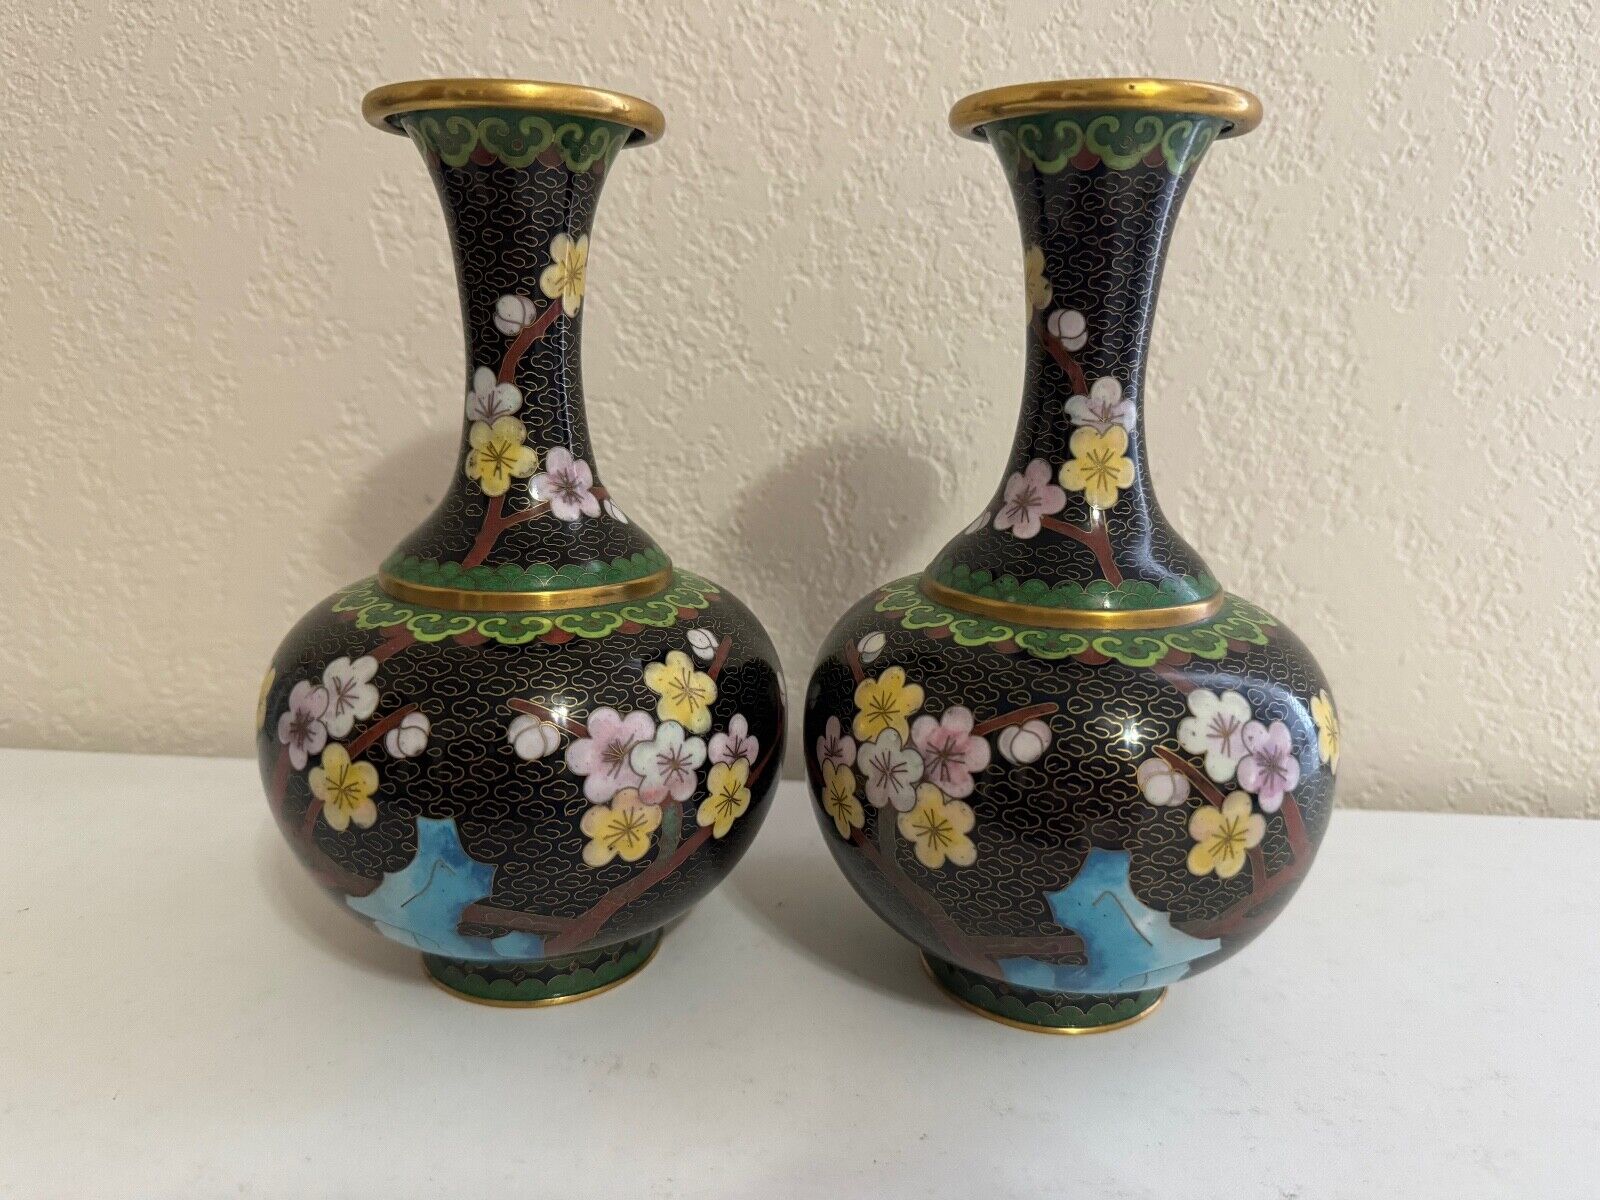 Vtg Chinese Mirrored Pair of Cloisonne Vases w/ Flowers & Butterfly Decoration